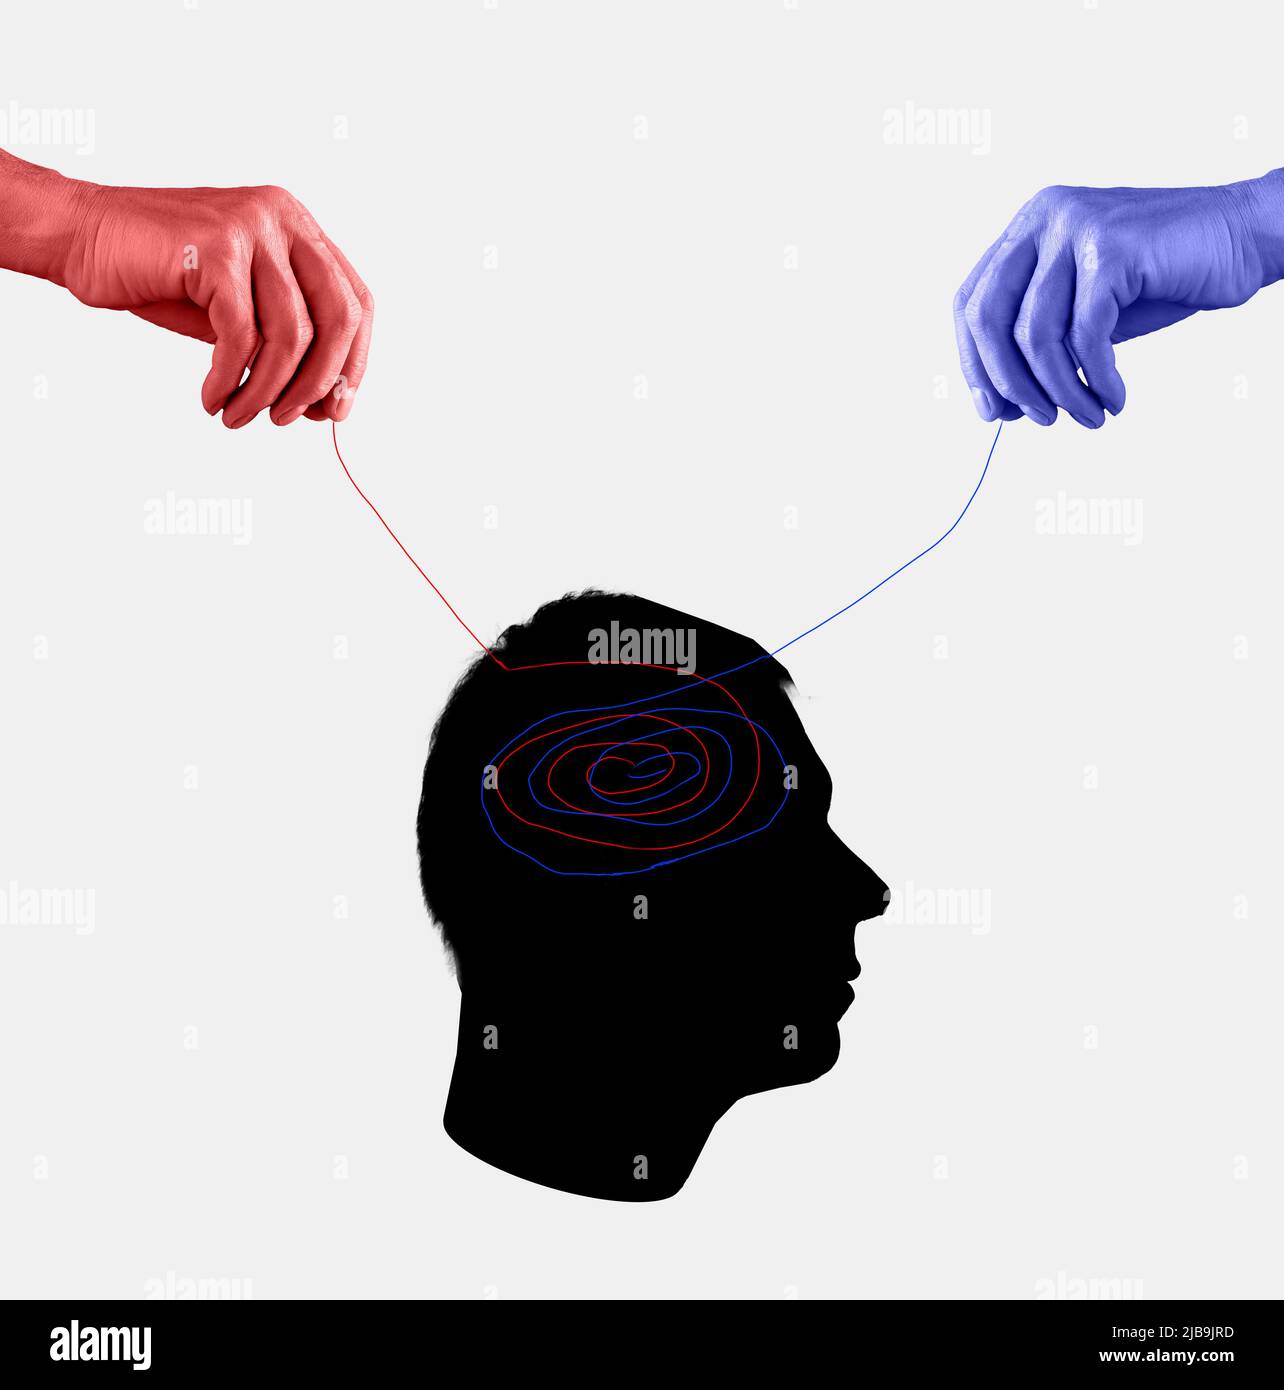 Manipulation from two sides, propaganda. Confusion, doubts, contradictions, analysis in person mind. Red and blue hands holding strings over human head and trying to influence opinion, attitude. photo Stock Photo